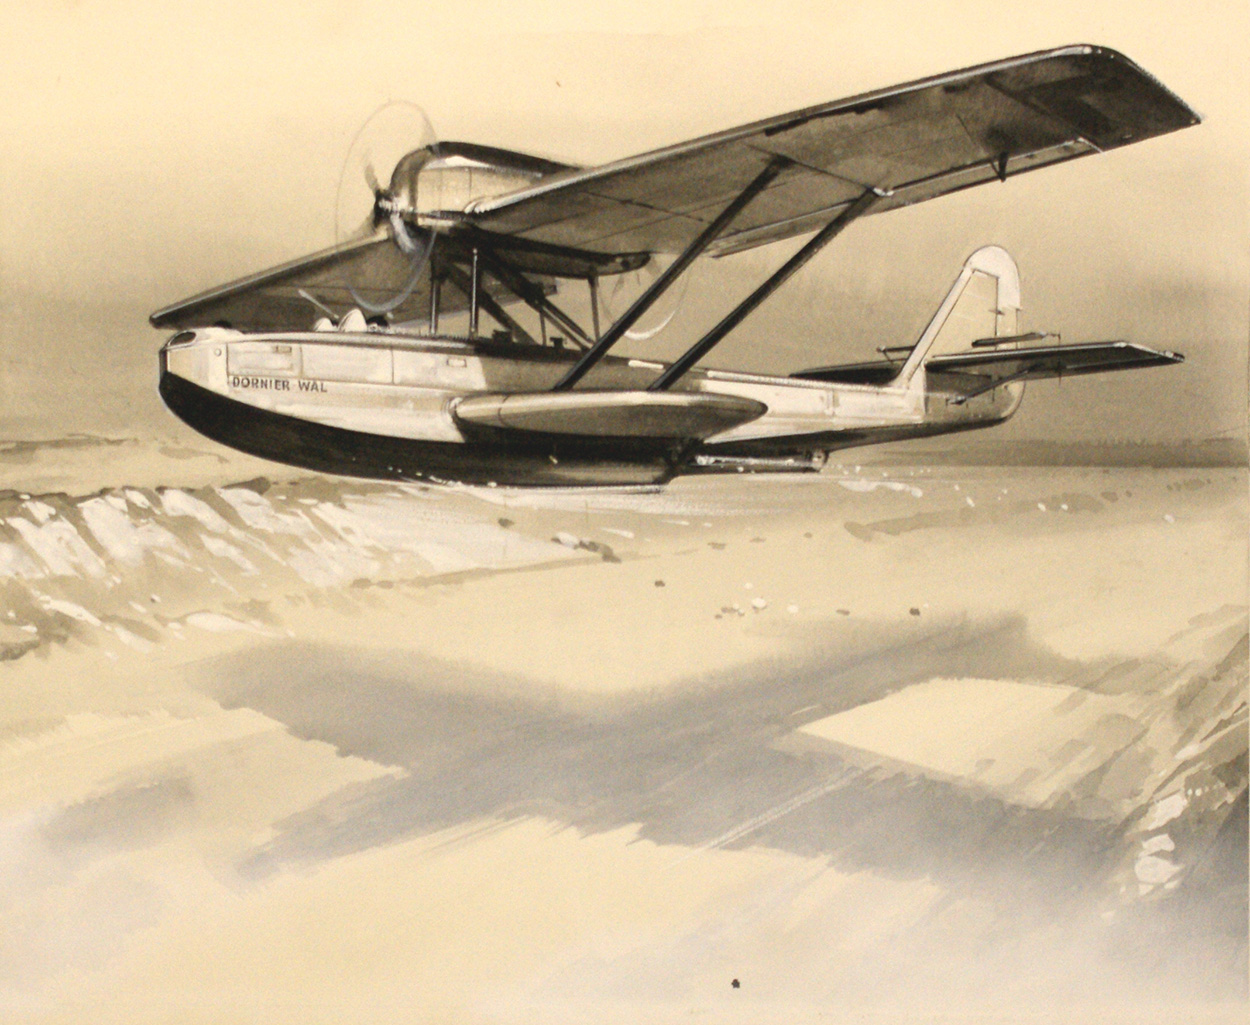 Flying to the North Pole (Original) art by Air (Wilf Hardy) at The Illustration Art Gallery